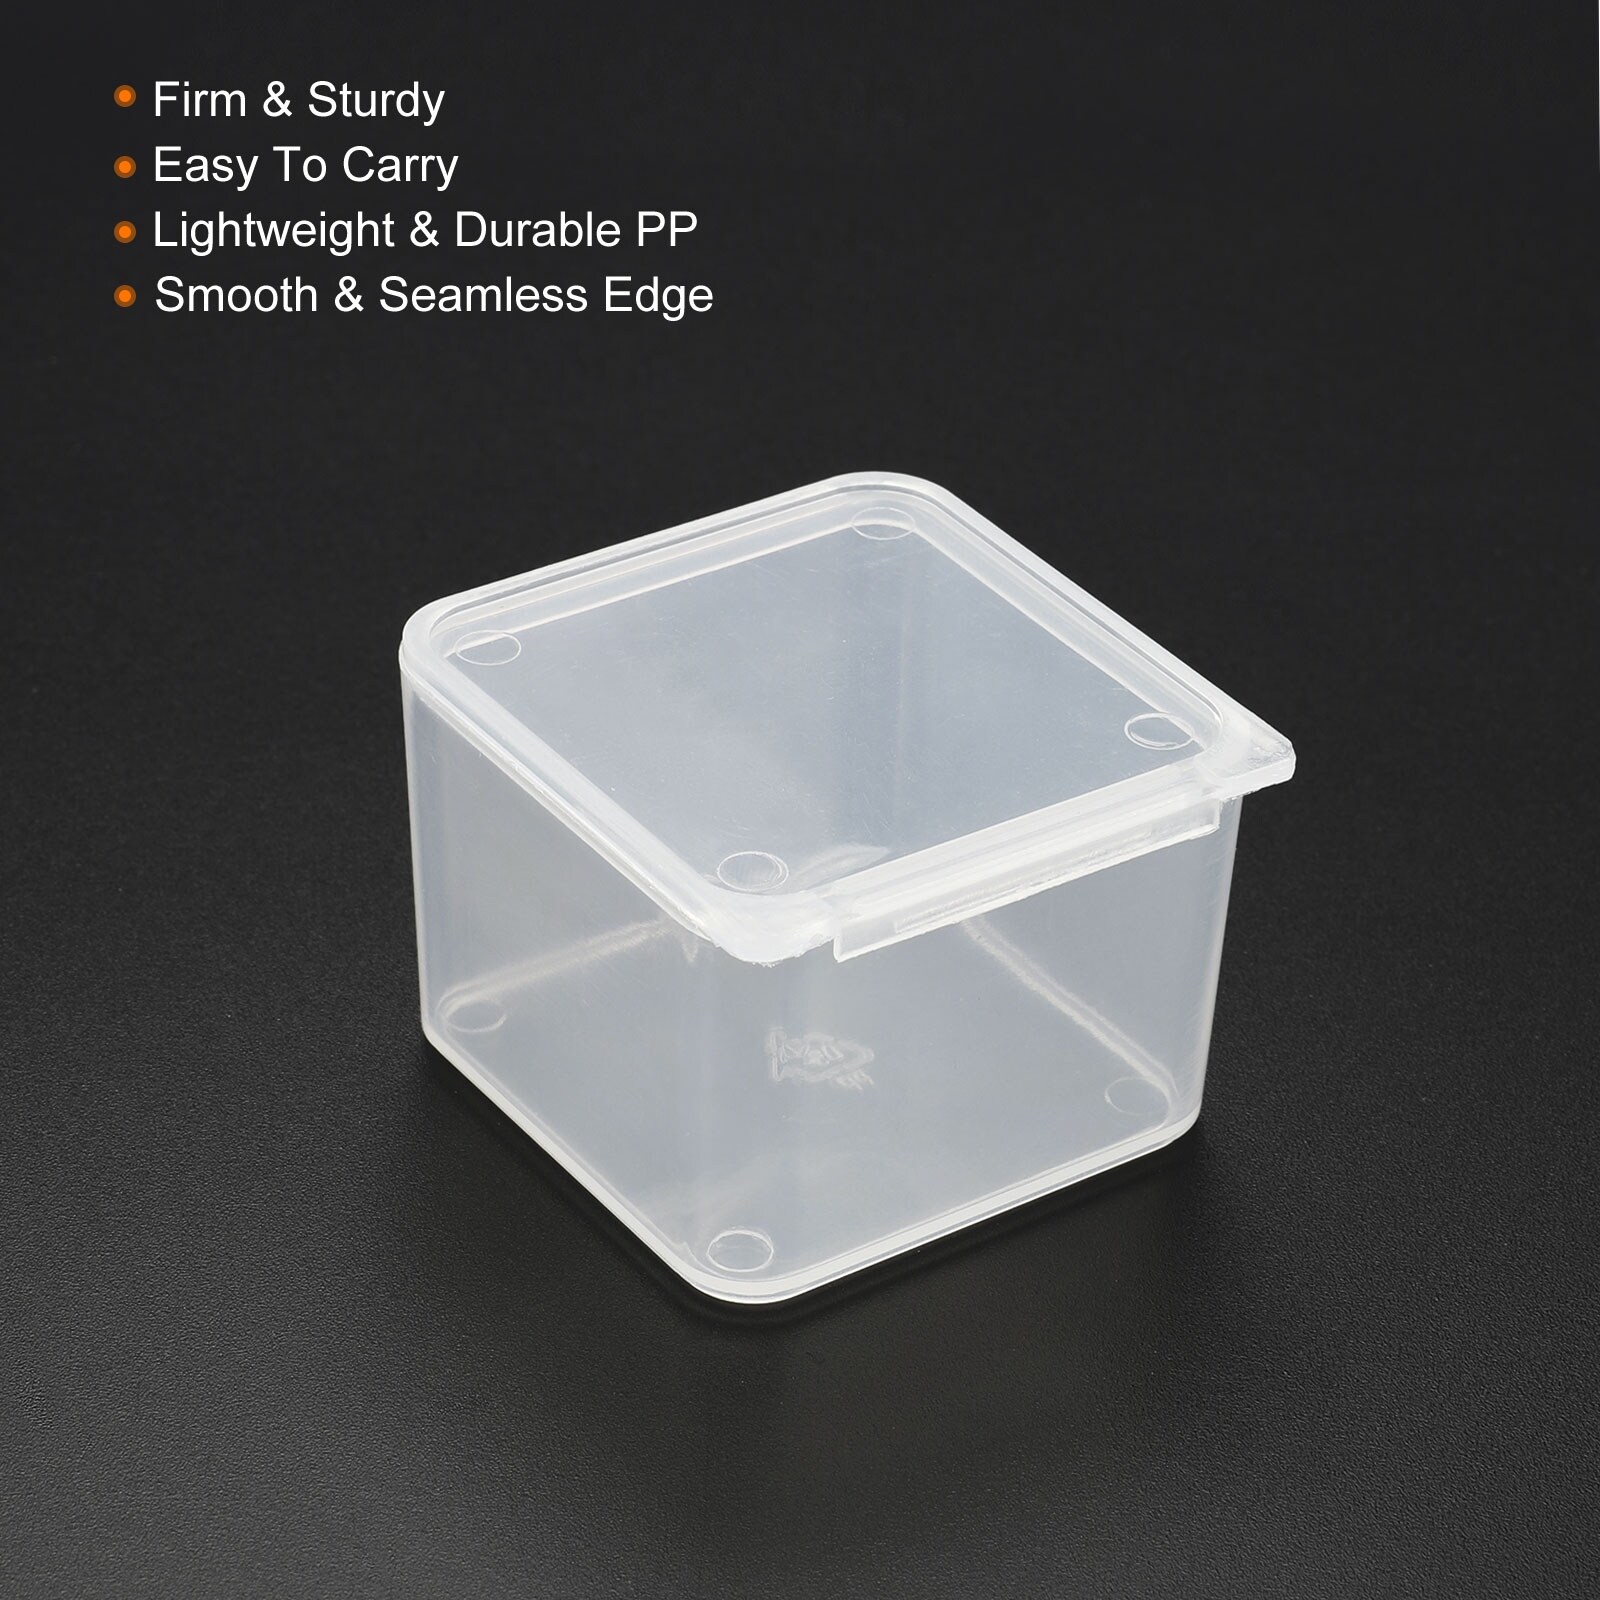 https://ak1.ostkcdn.com/images/products/is/images/direct/3d9b76404791757501aec17550951f7b22166d61/12pcs-Clear-Storage-Container-with-Hinged-Lid-40x28mm-Plastic-Square-Craft-Box.jpg